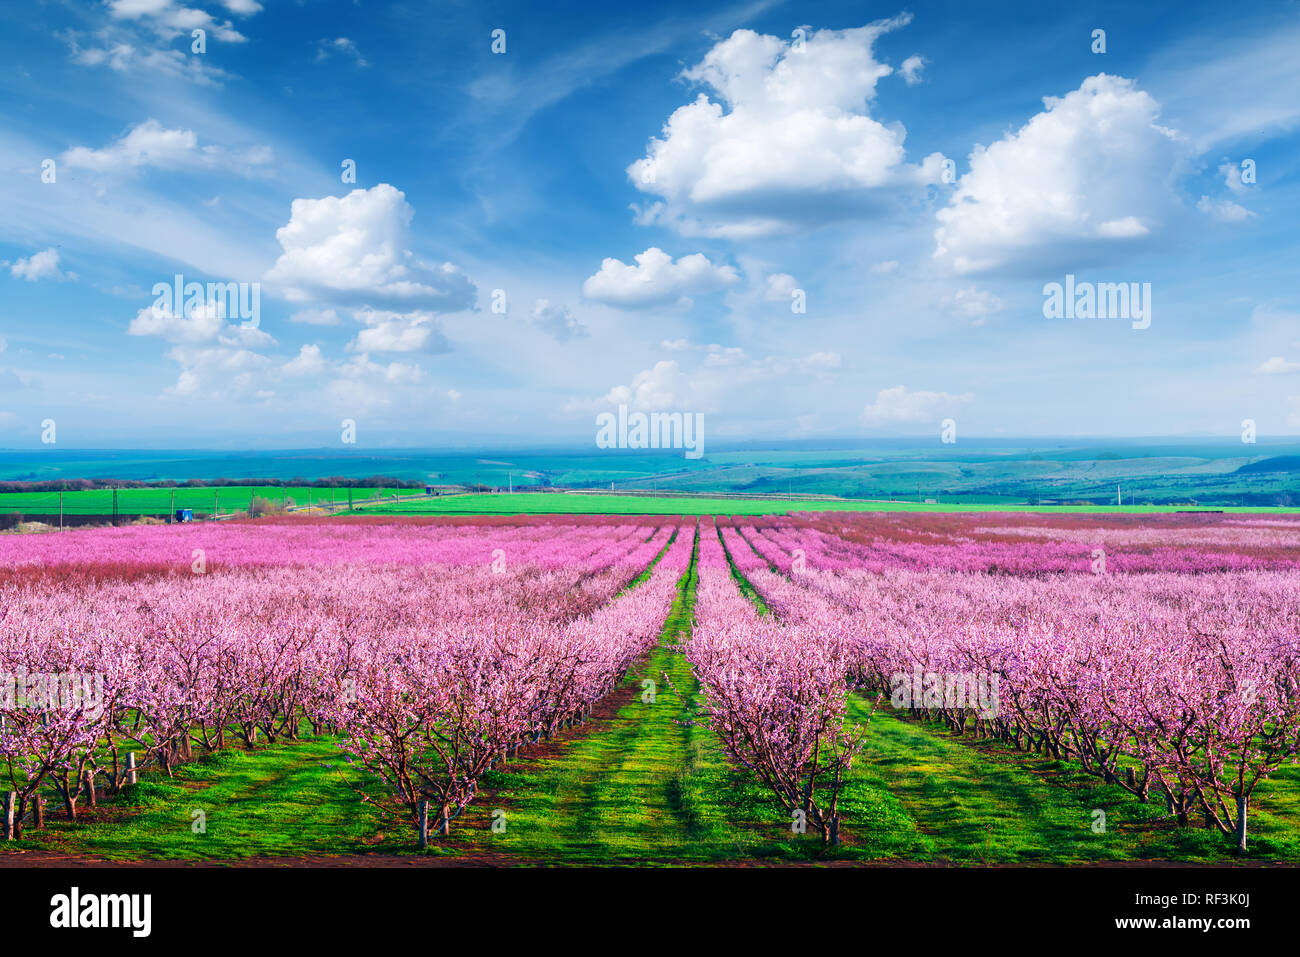 Rows of blossom peach trees in spring garden. Landscape photography Stock Photo